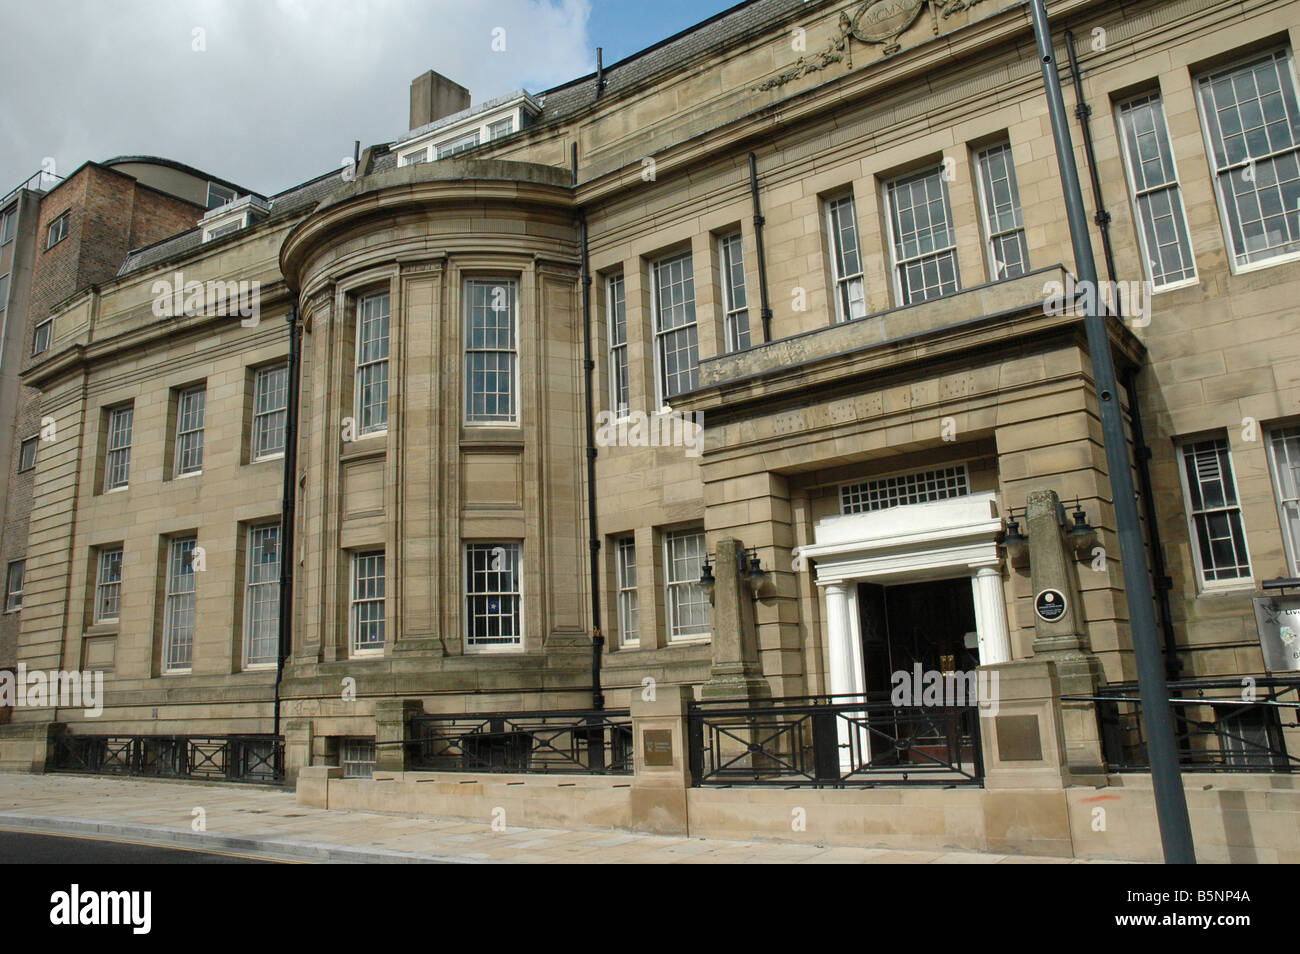 Liverpool College of Art is located at 68 Hope Street in Liverpool England Stock Photo